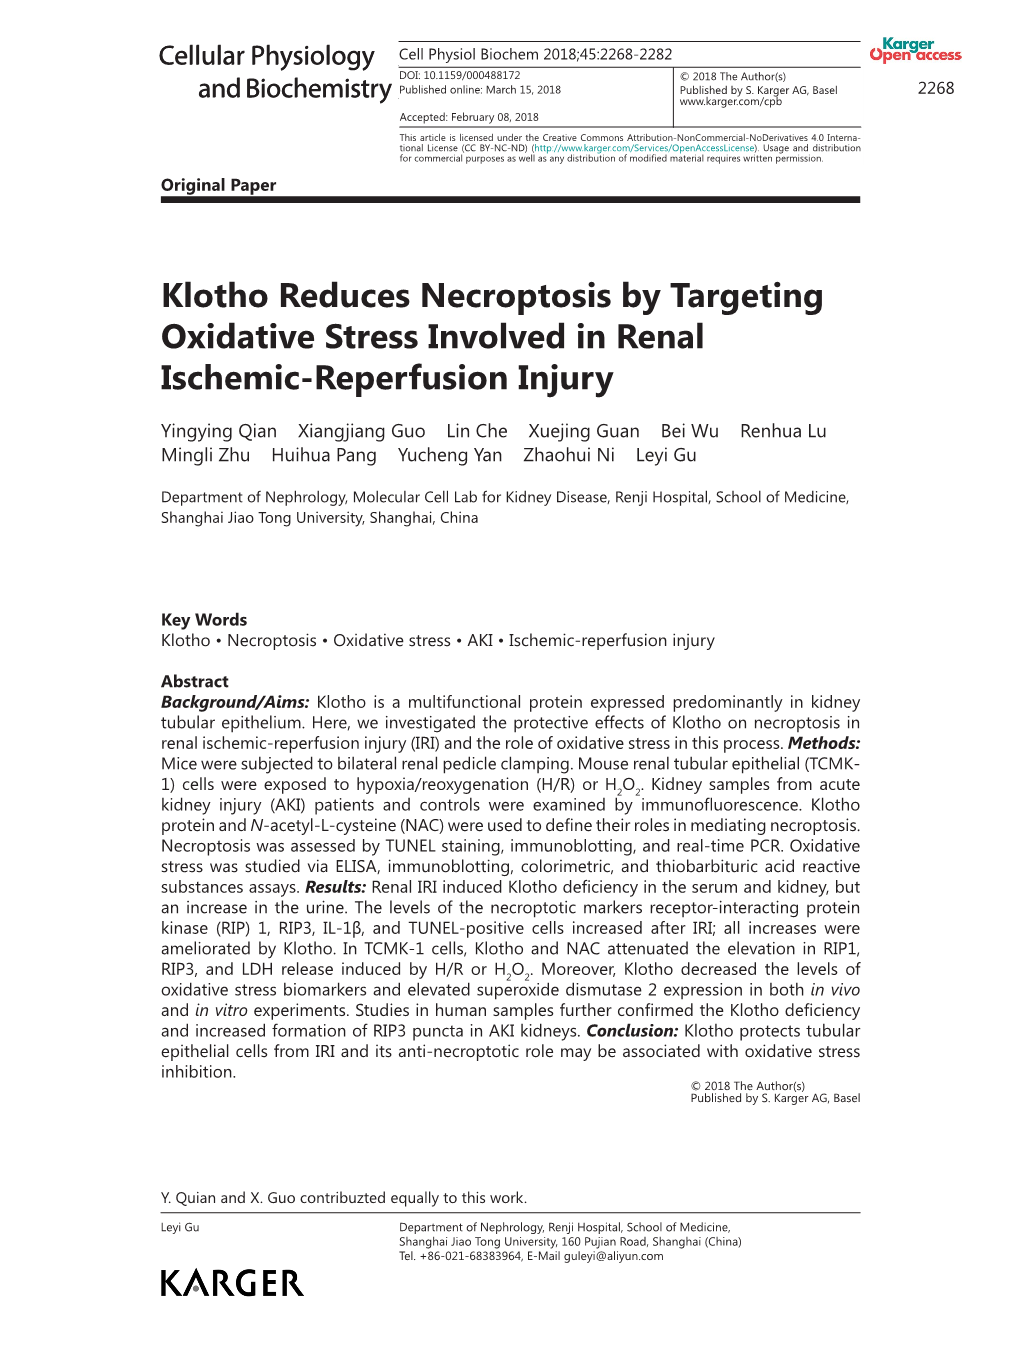 Klotho Reduces Necroptosis by Targeting Oxidative Stress Involved in Renal Ischemic-Reperfusion Injury